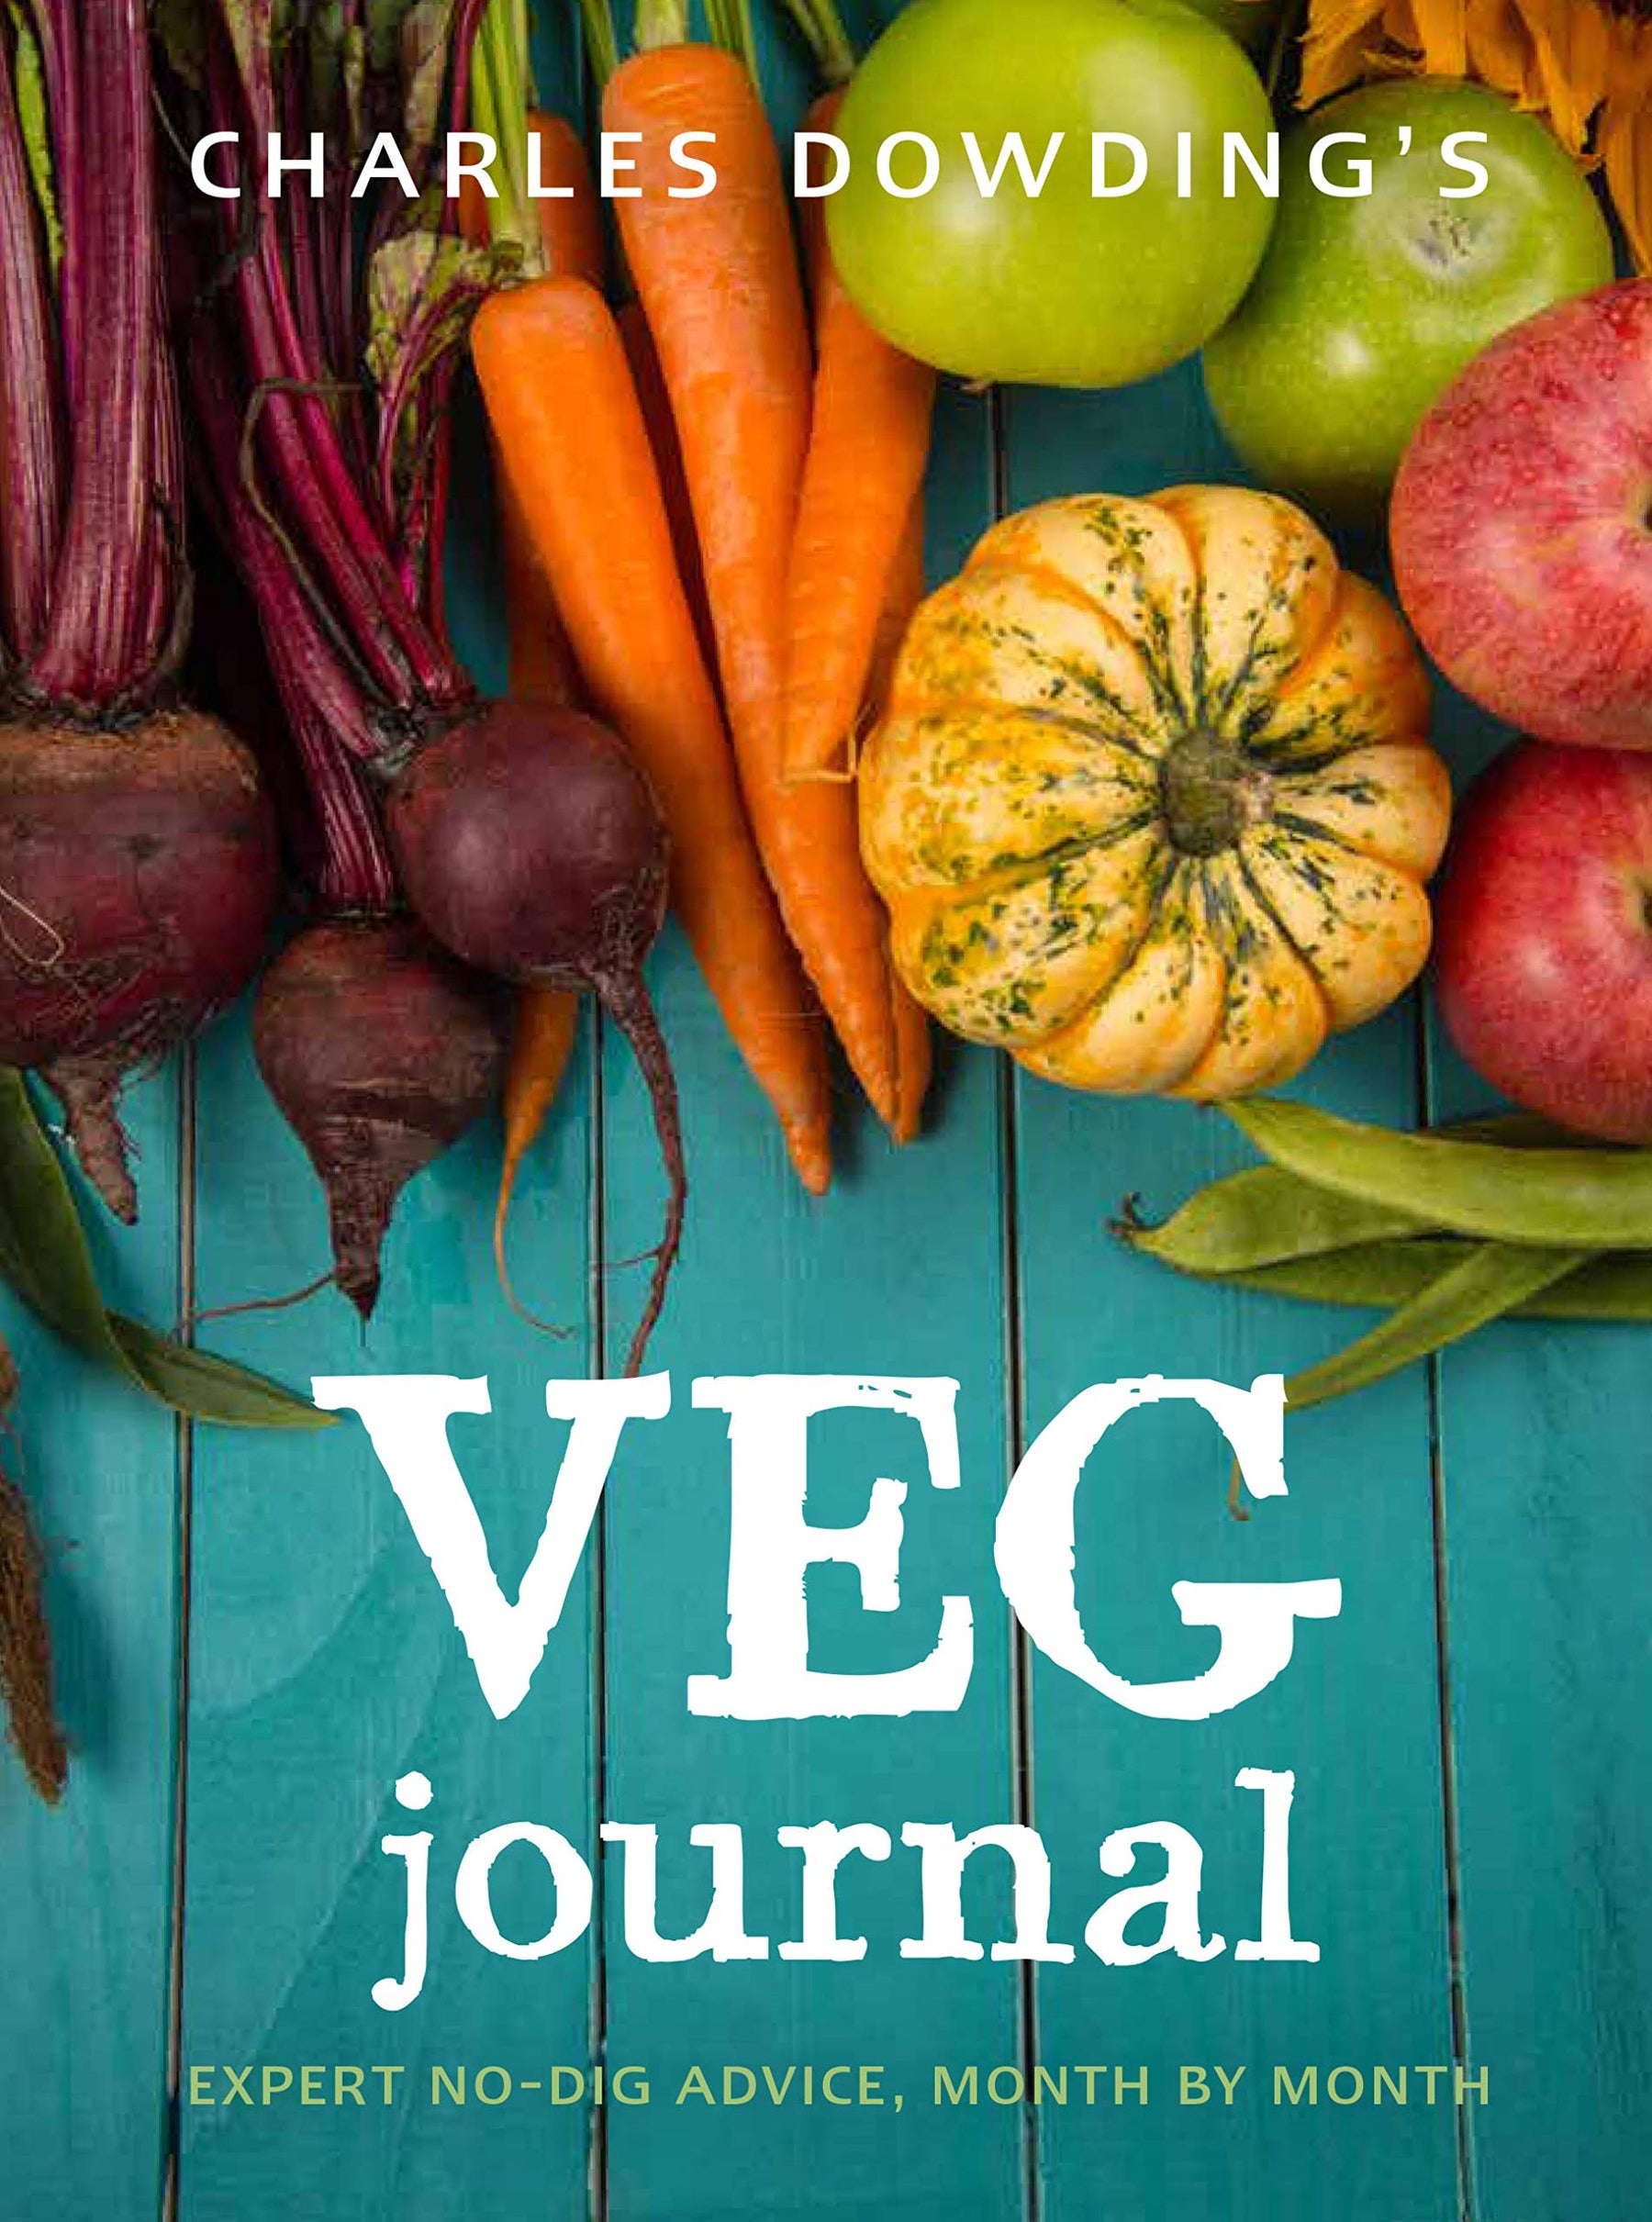 Charles Dowding's Veg Journal Book : Expert no-dig advice, month by month